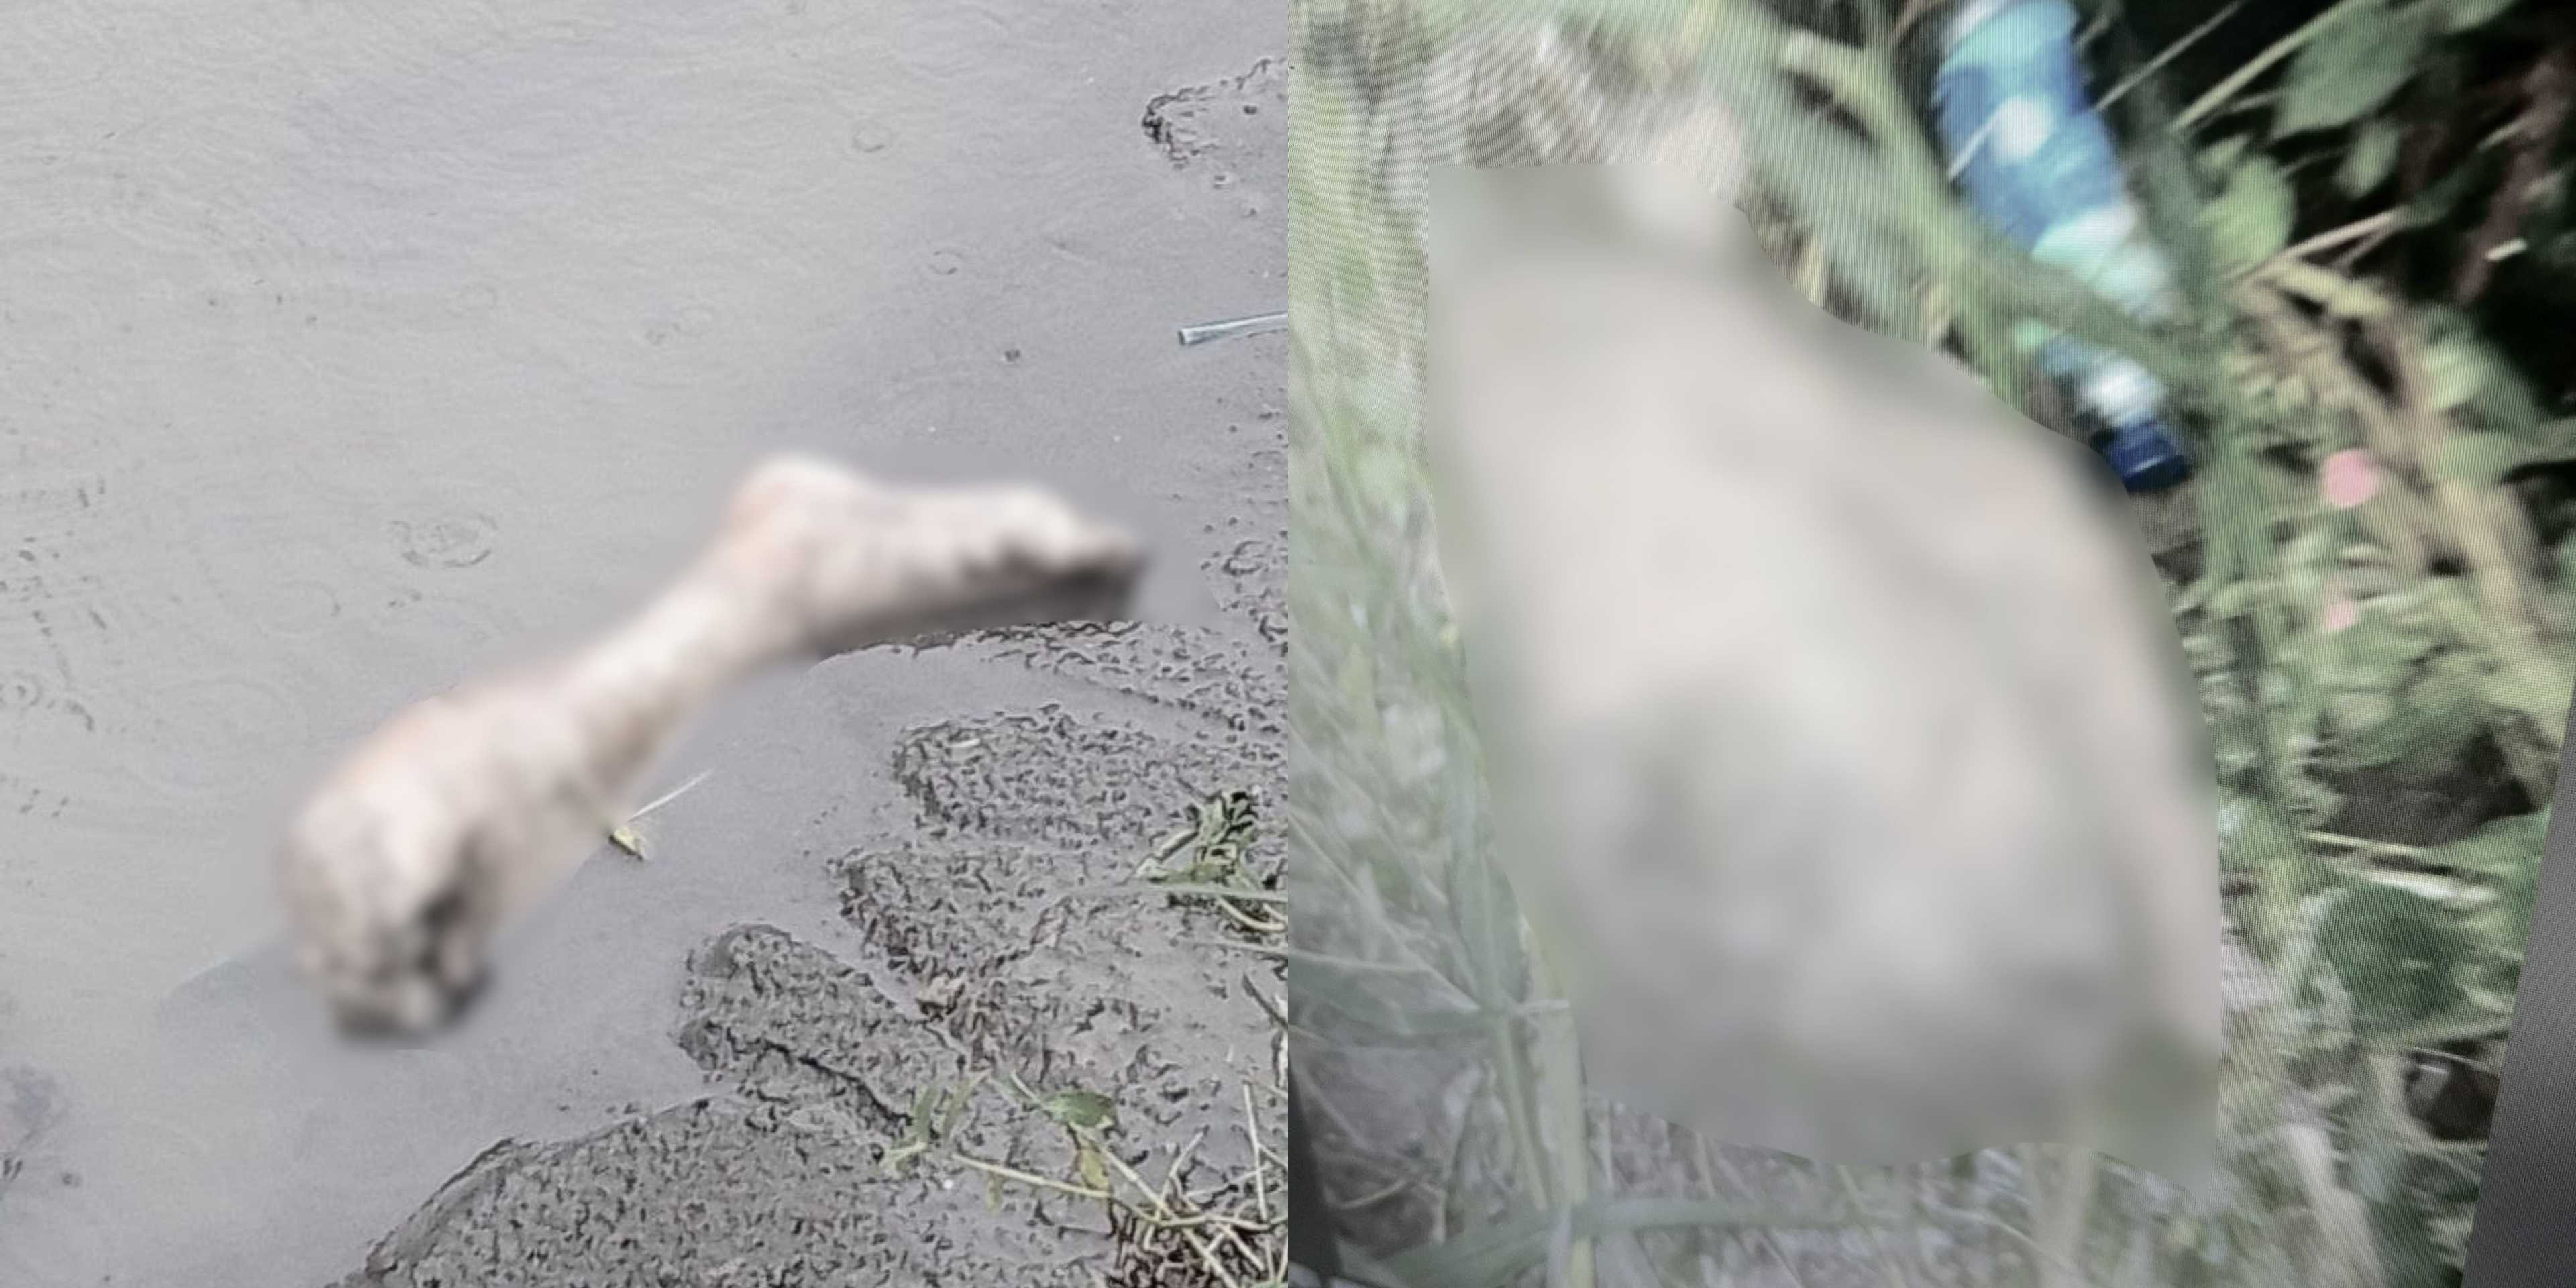 Unidentified human body parts found in Cavite